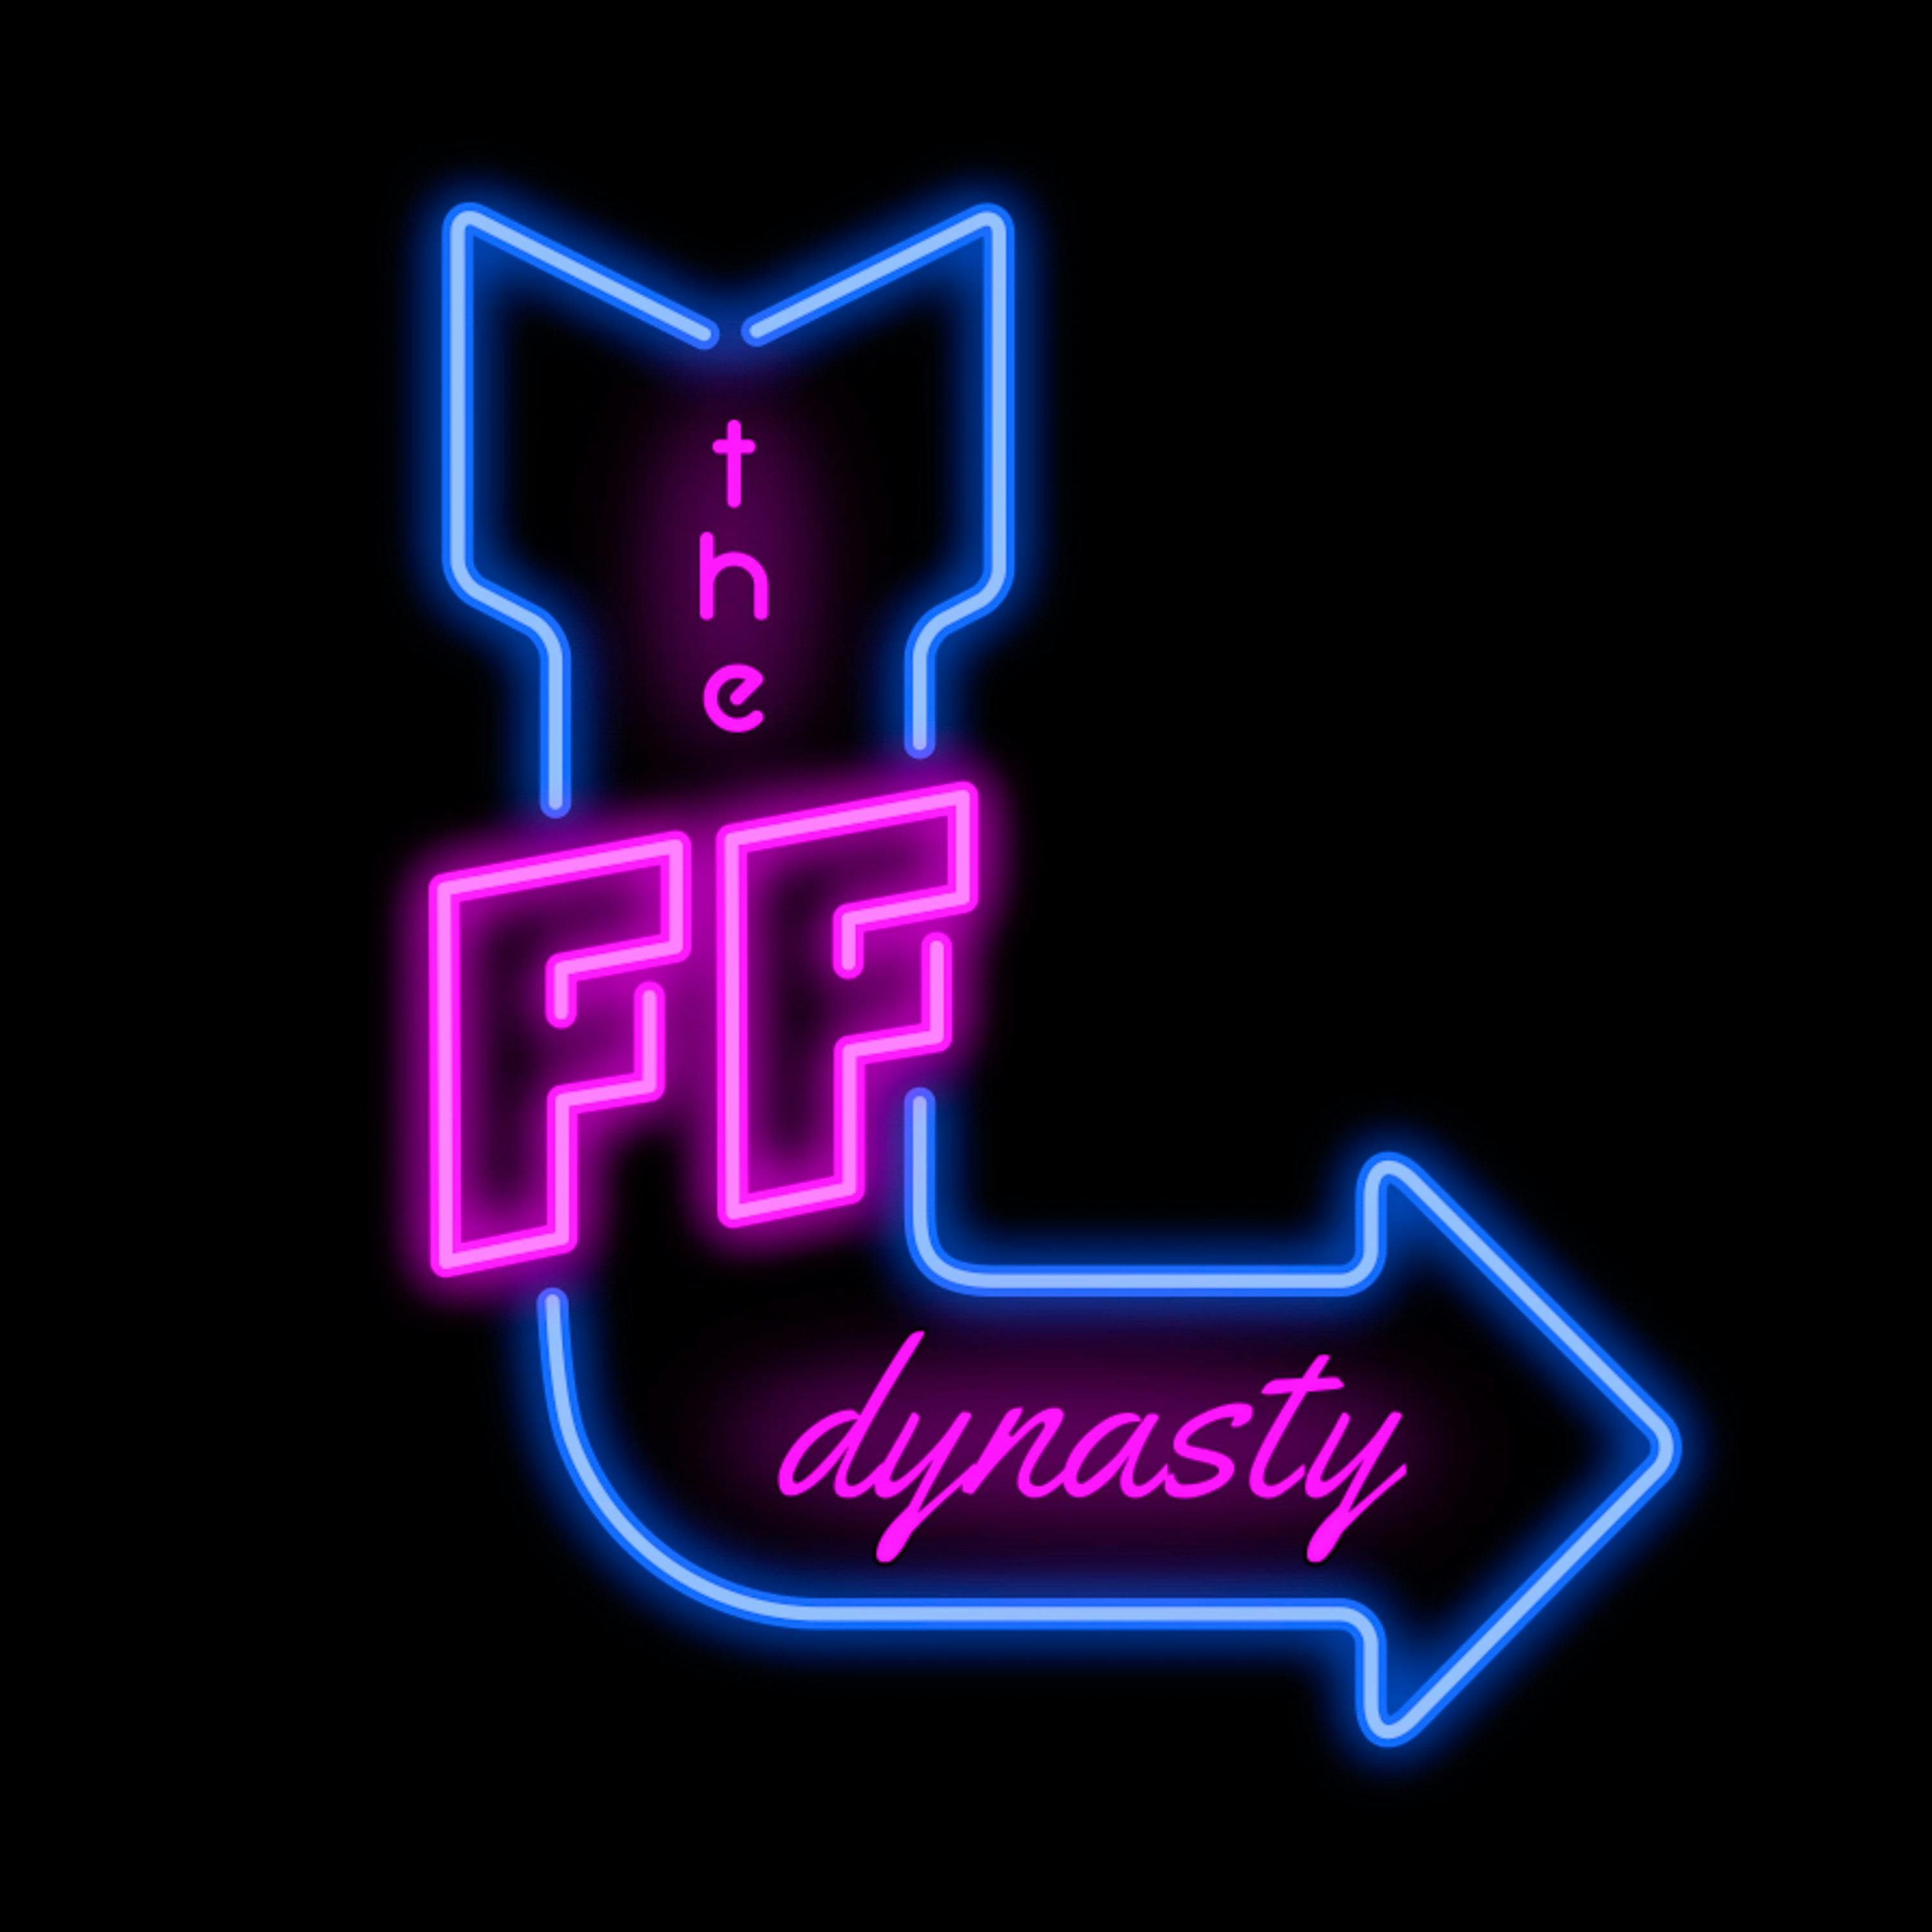 The FF Dynasty - Pay The Price!: Dynasty Assets to Overpay For